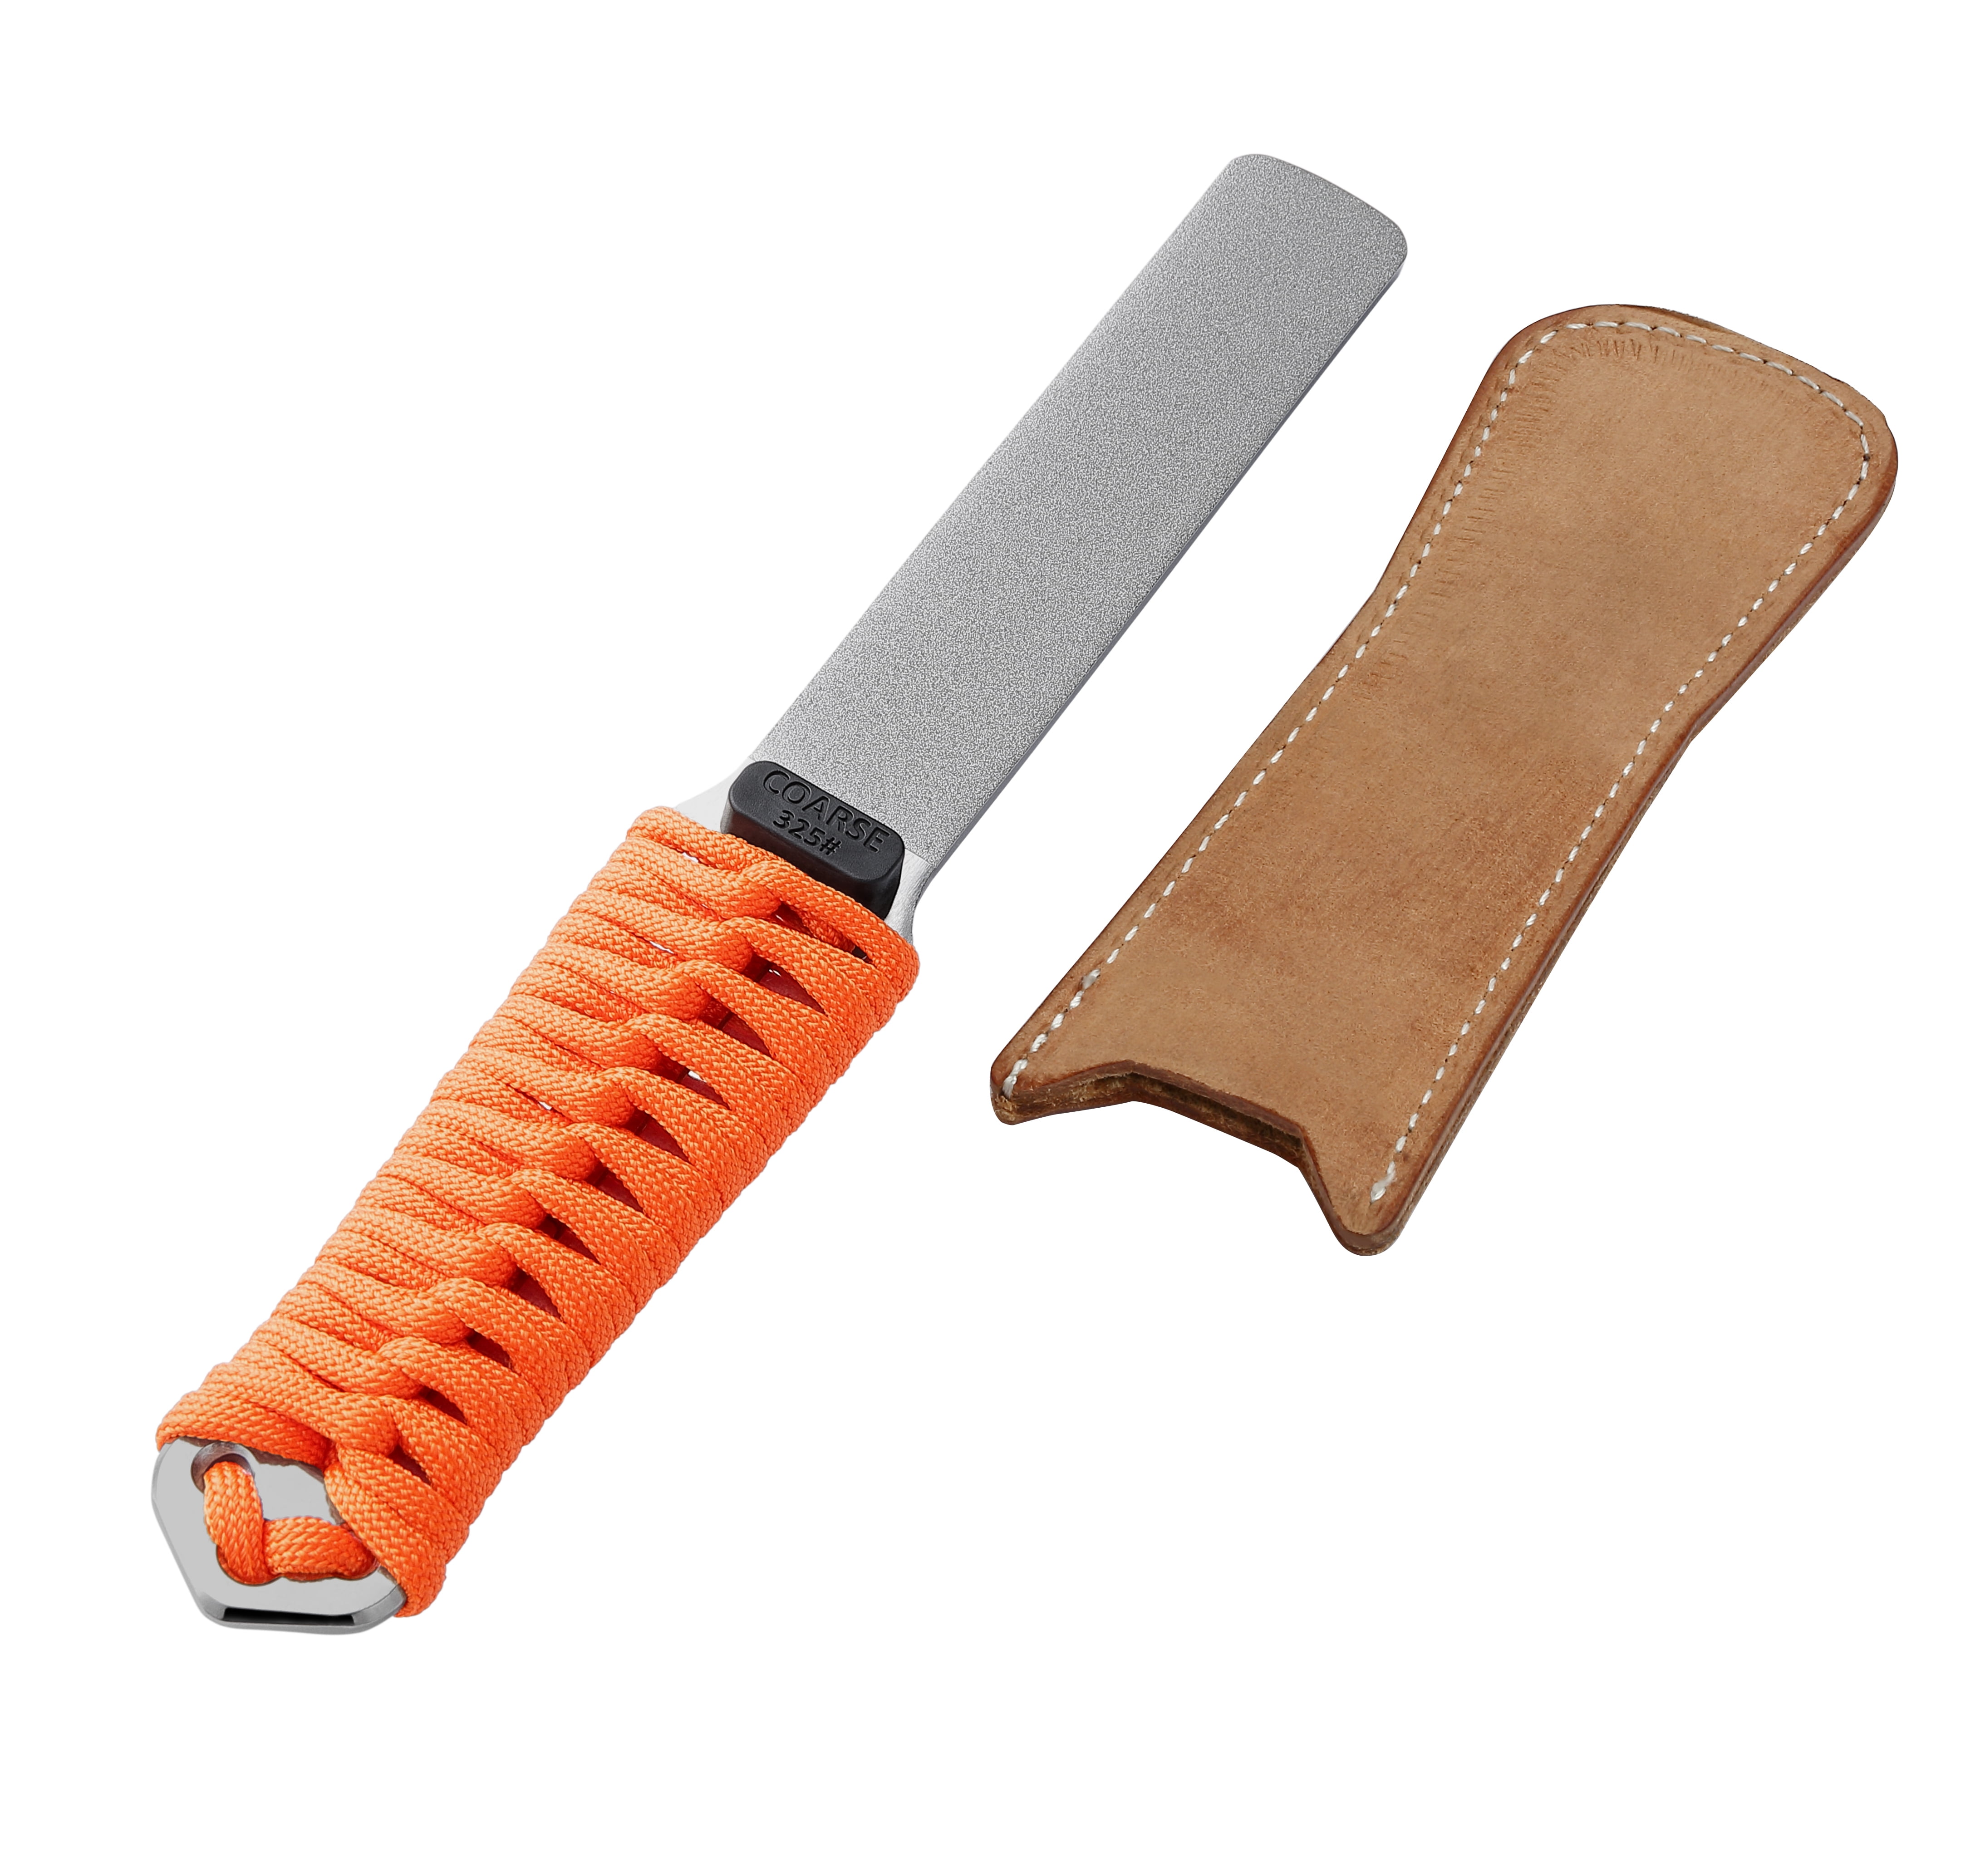 Semicircular Double-sided leather strop for sharpening